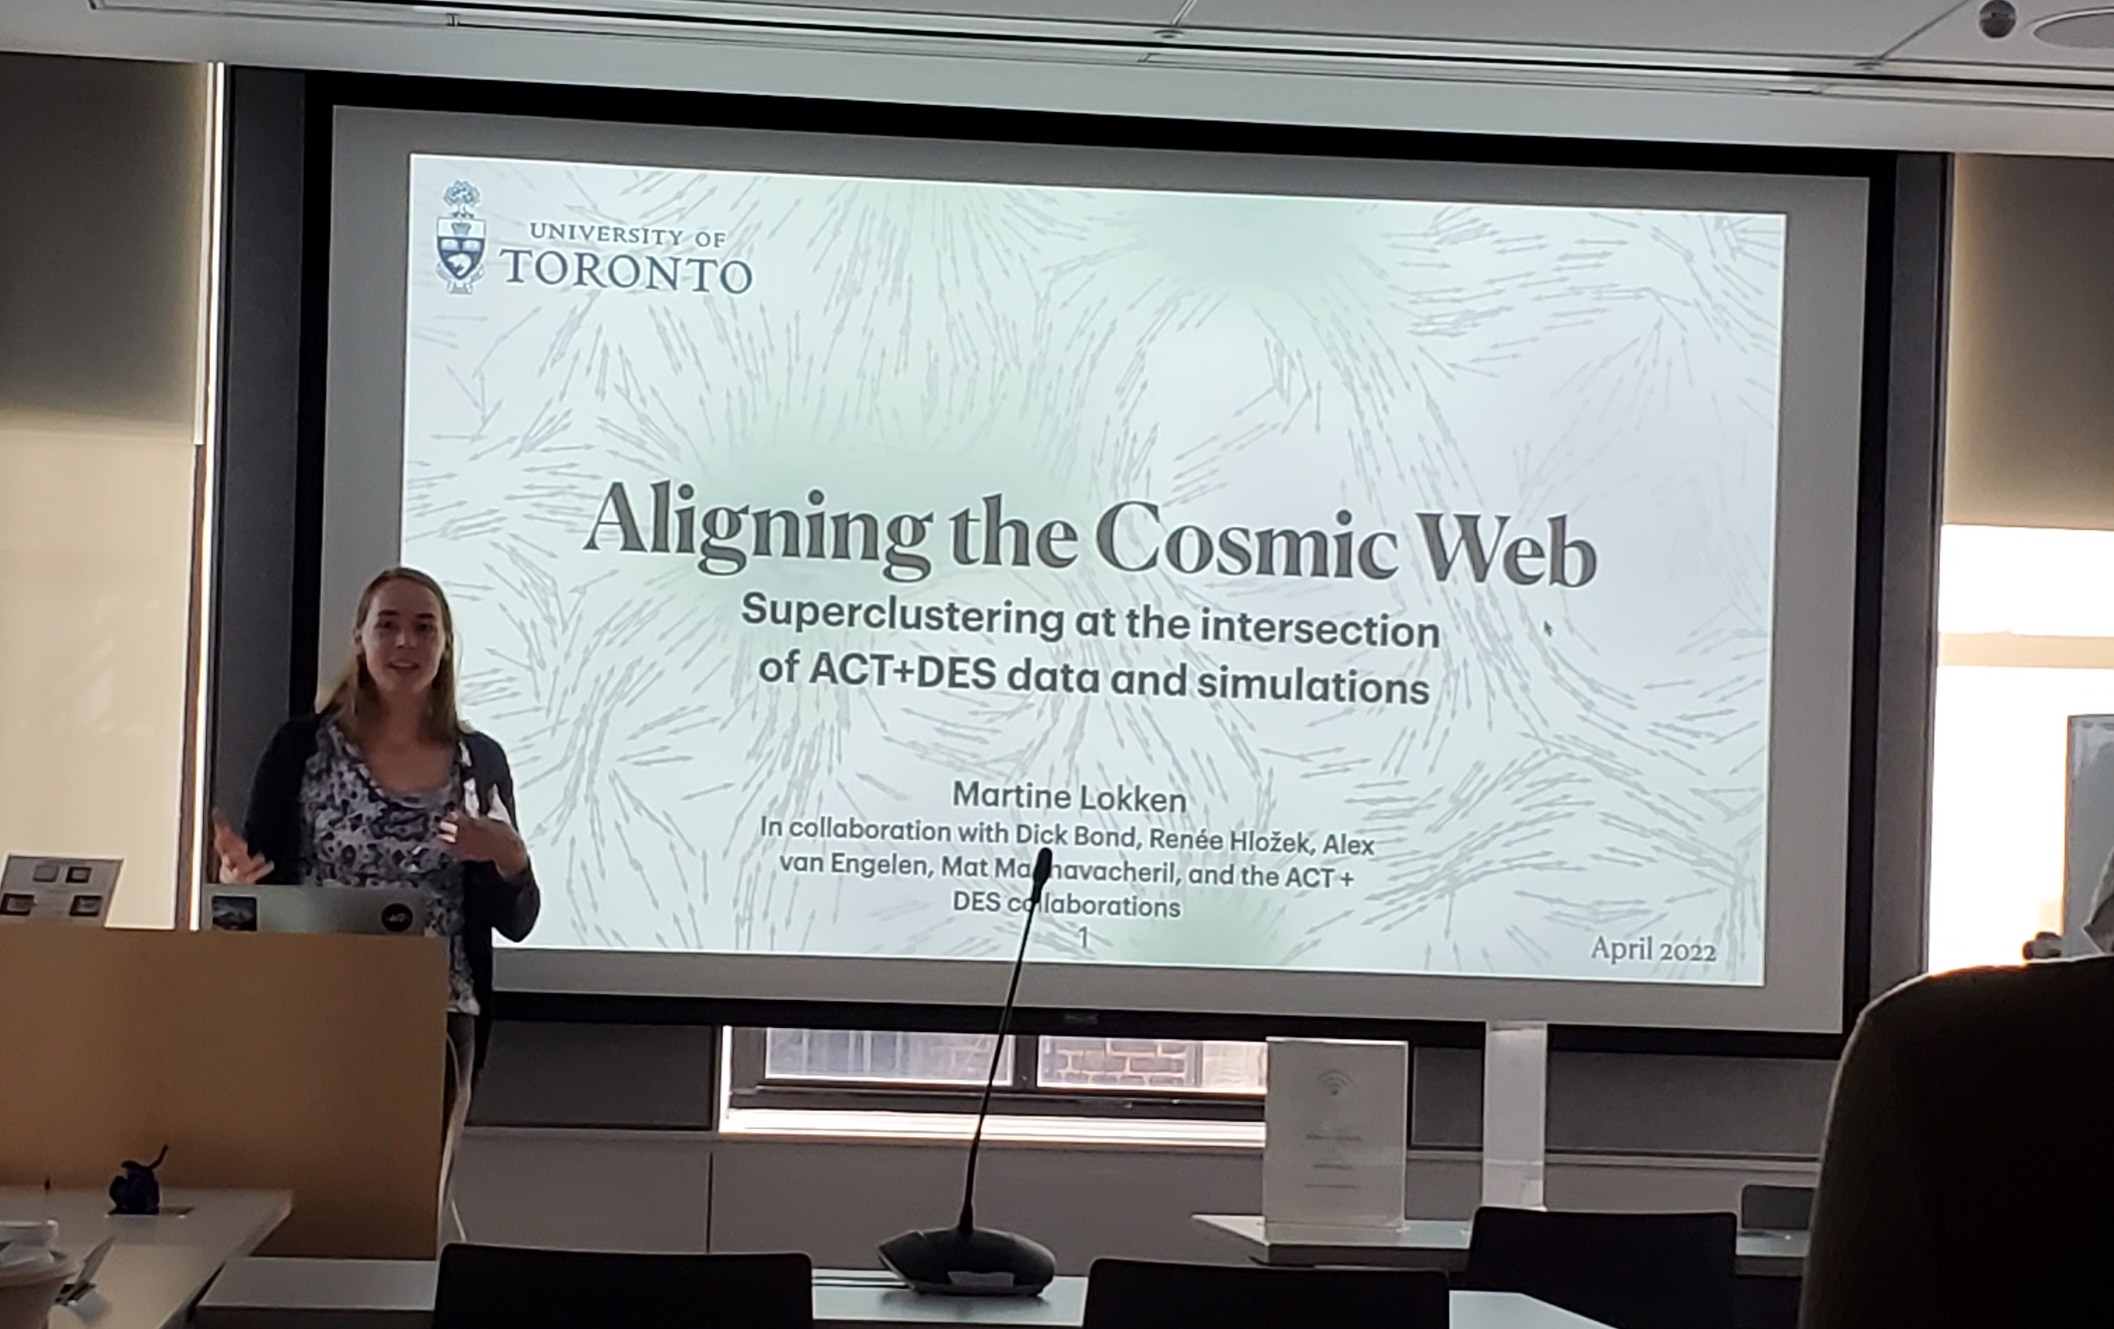 Image of me giving a talk at the Center for Computational Astrophysics, titled Aligning the Cosmic Web.